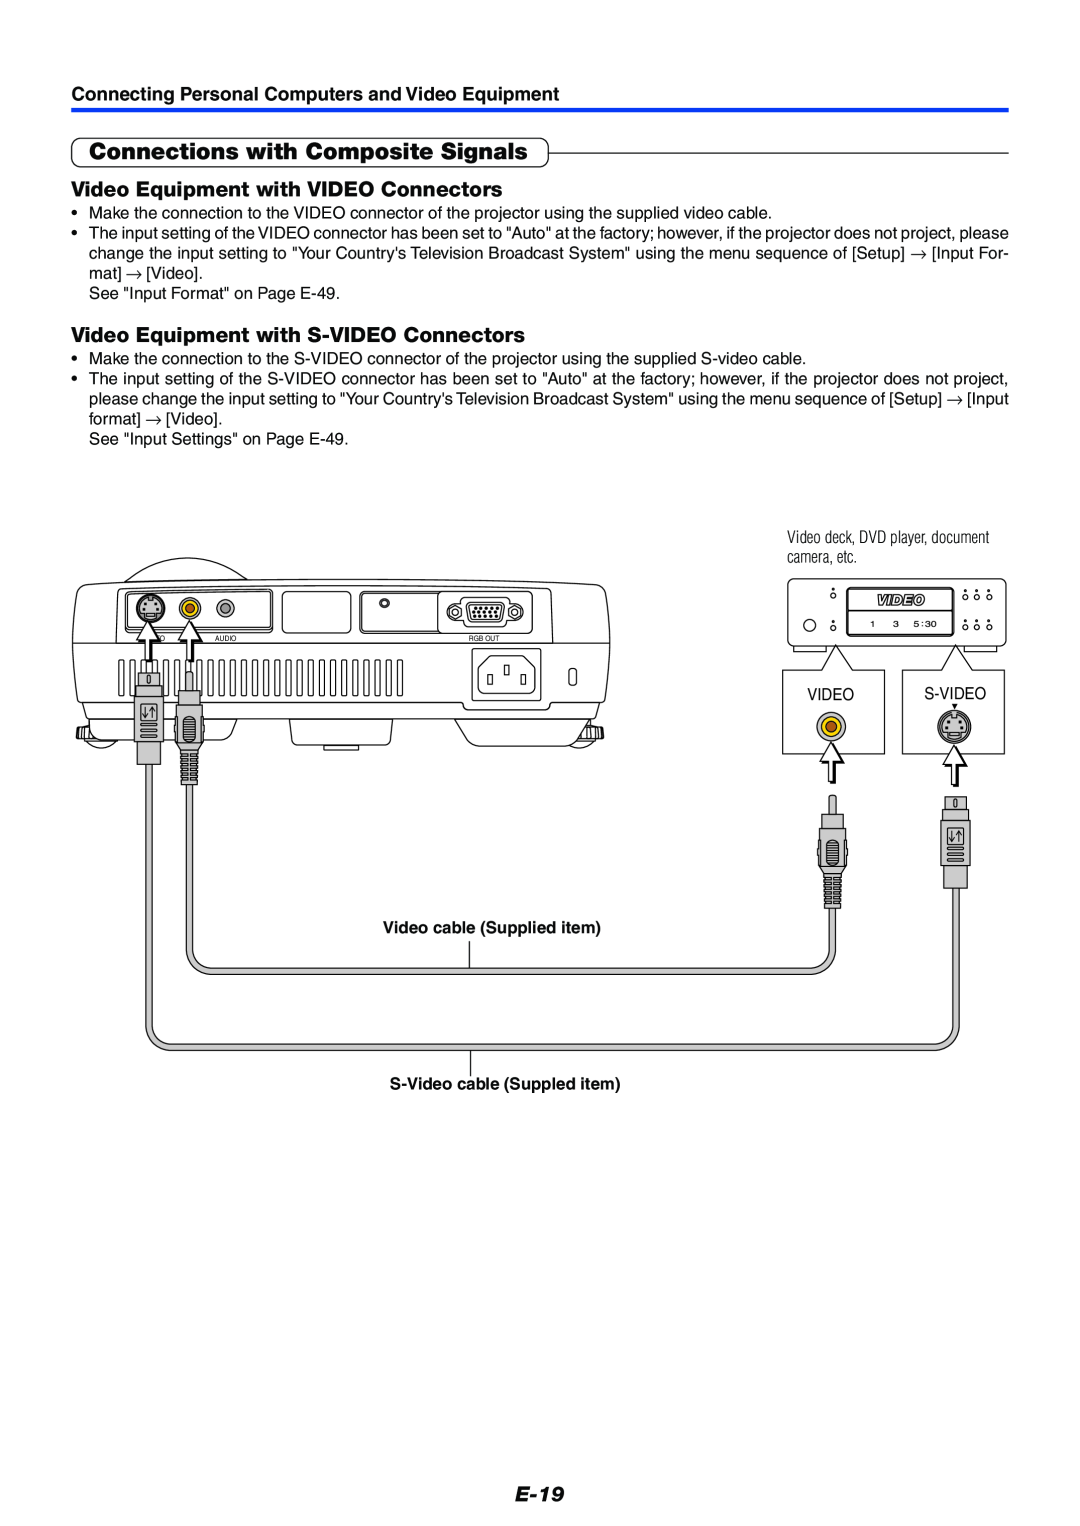 PLUS Vision Data Projector user manual Connections with Composite Signals, Video Equipment with VIDEO Connectors, E-19 